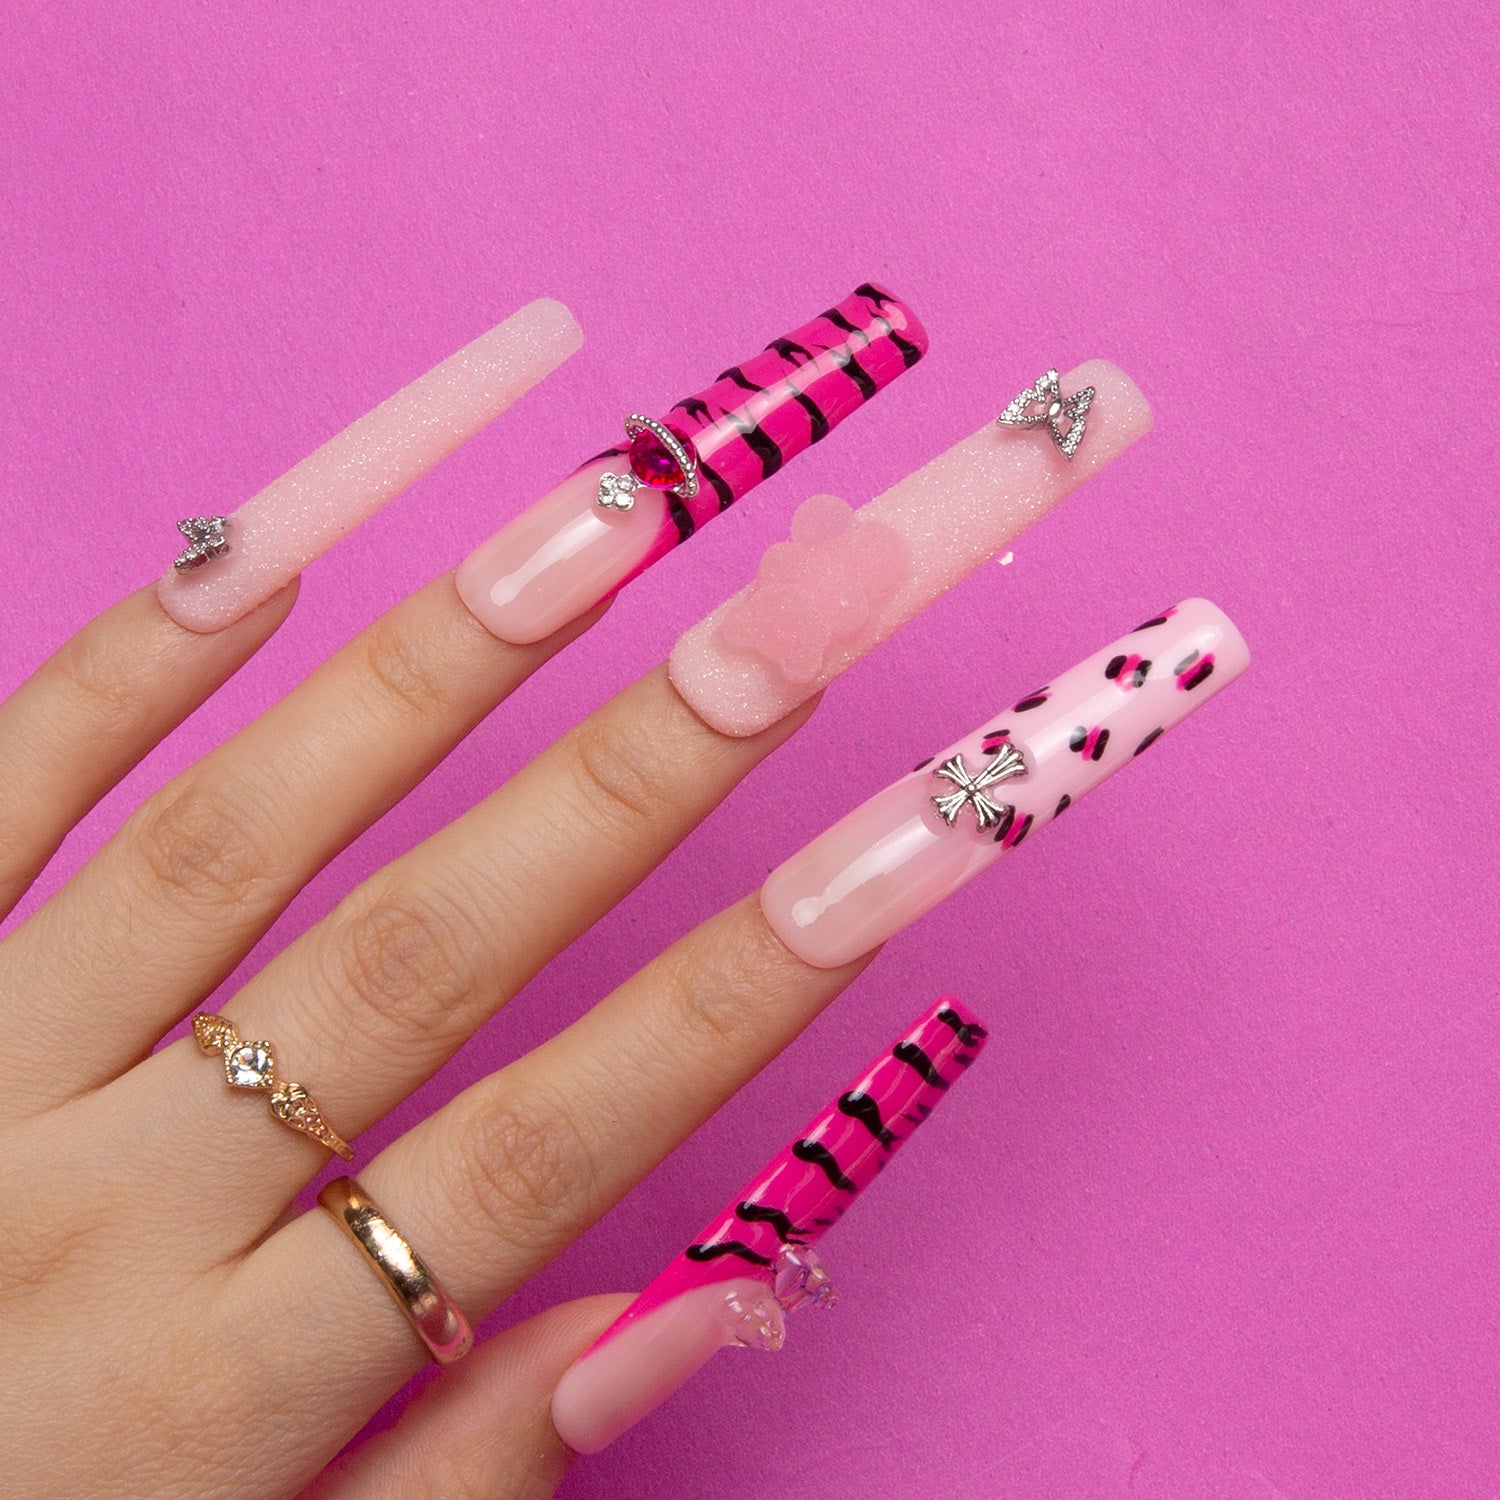 Hand displaying 'Safari Love' press-on nails with hot pink French tips, black leopard prints, glitter accents, and butterfly and bow charms on a pink background.